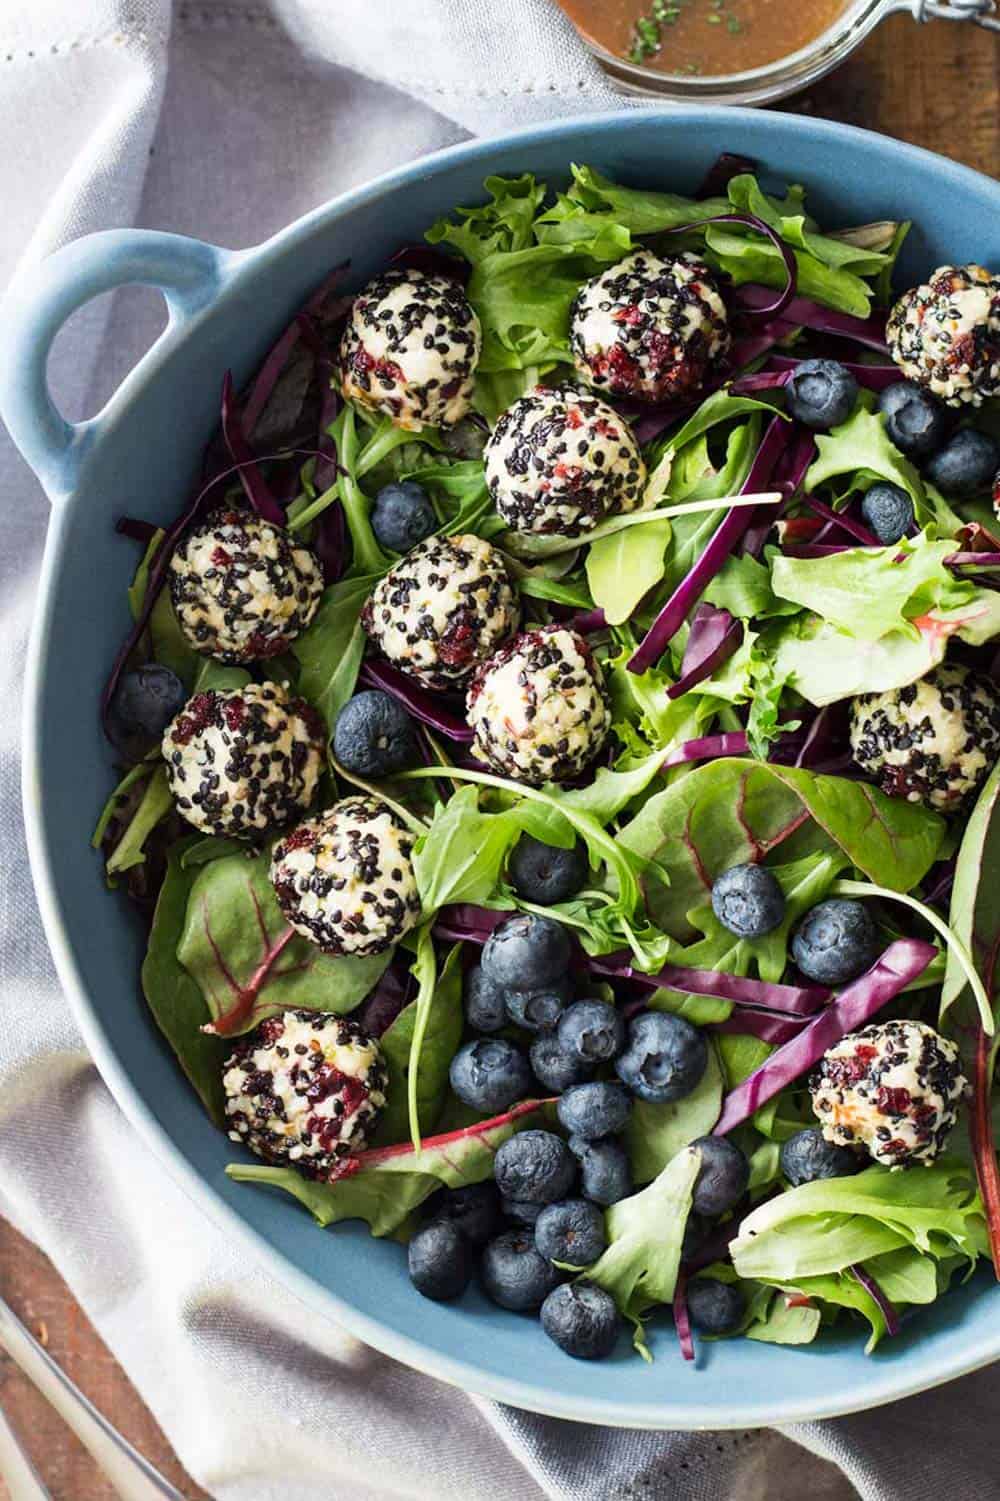 Warm Goat Cheese Salad in blue salad bowl